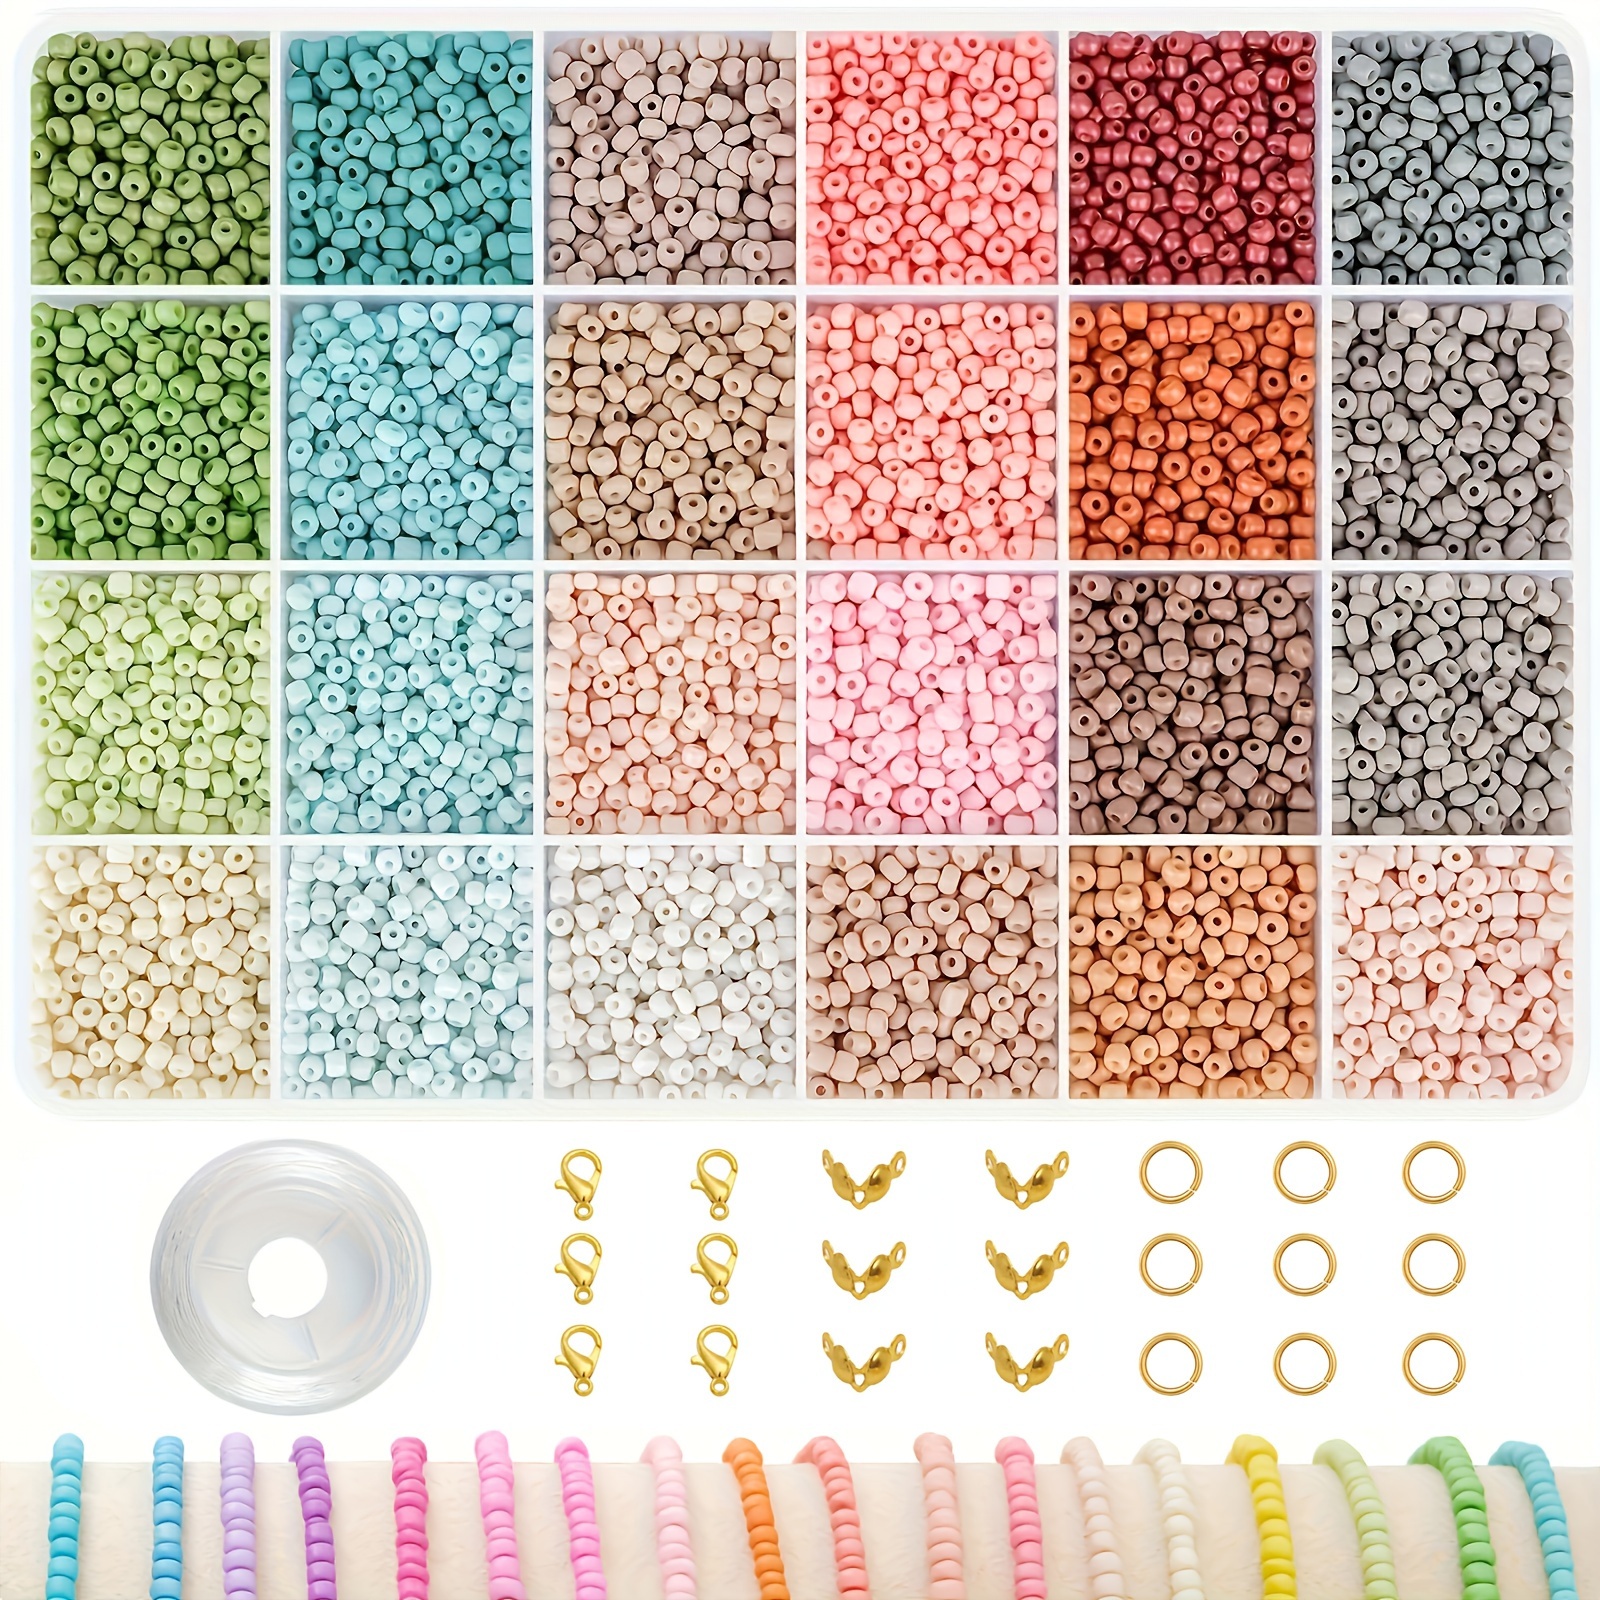 

7200pcs 3mm Morandi Color Series Glass Rice Beads With Cover Box, Loose Beads, For Diy Bracelet Necklace Jewelry Accessories